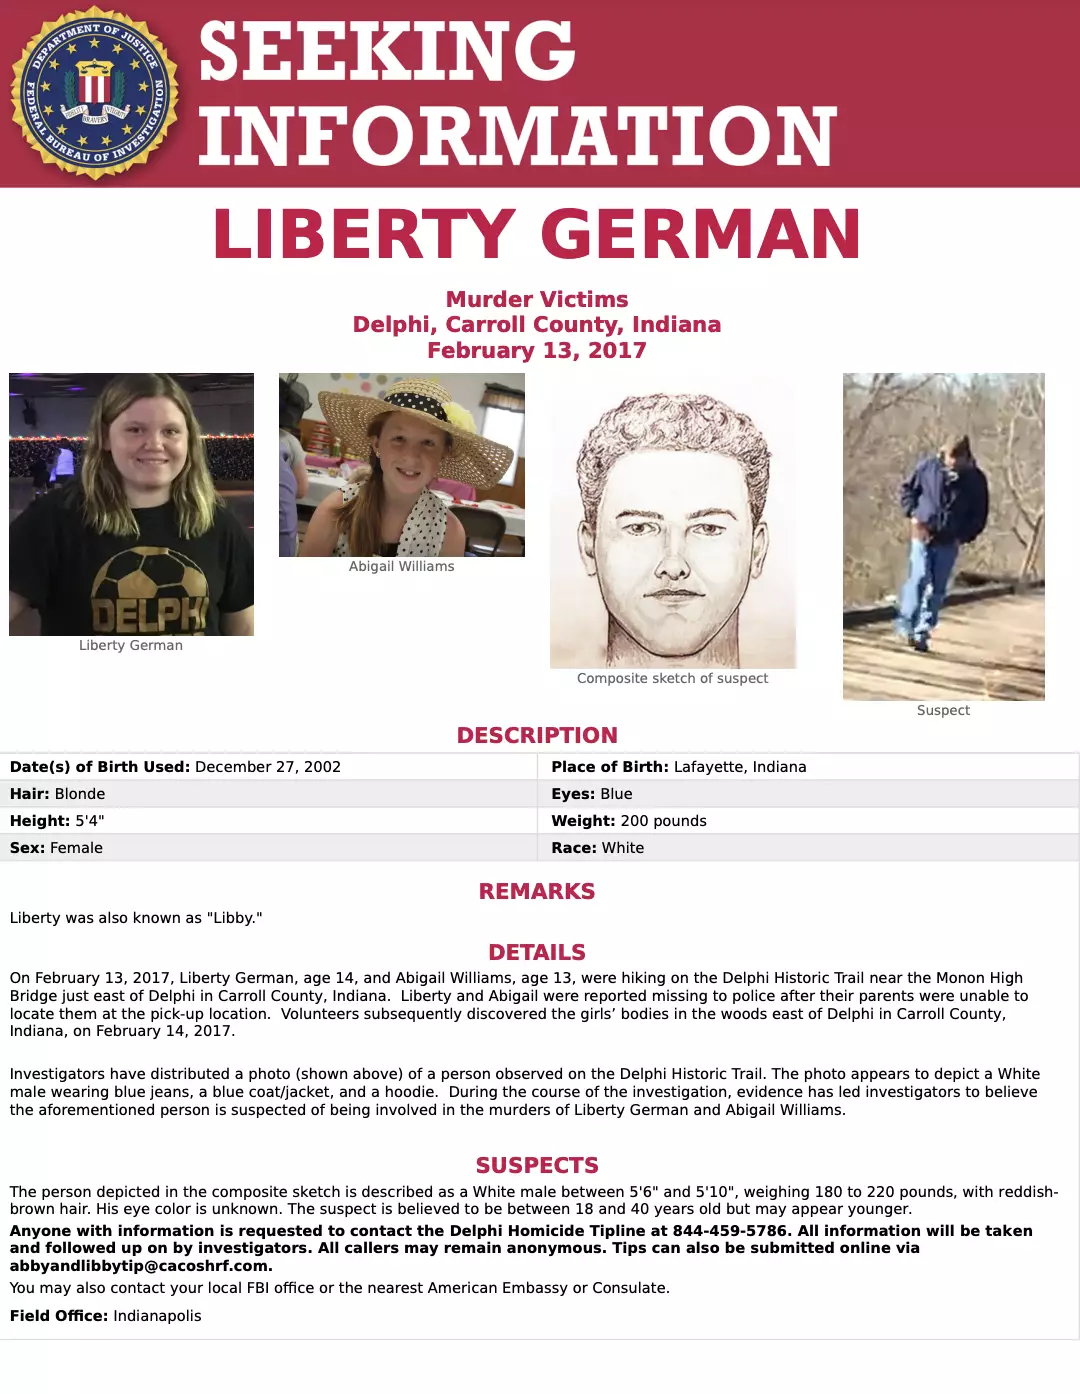 The FBI's appeal to find the person responsible for the murders of Abigail Williams and Liberty German.